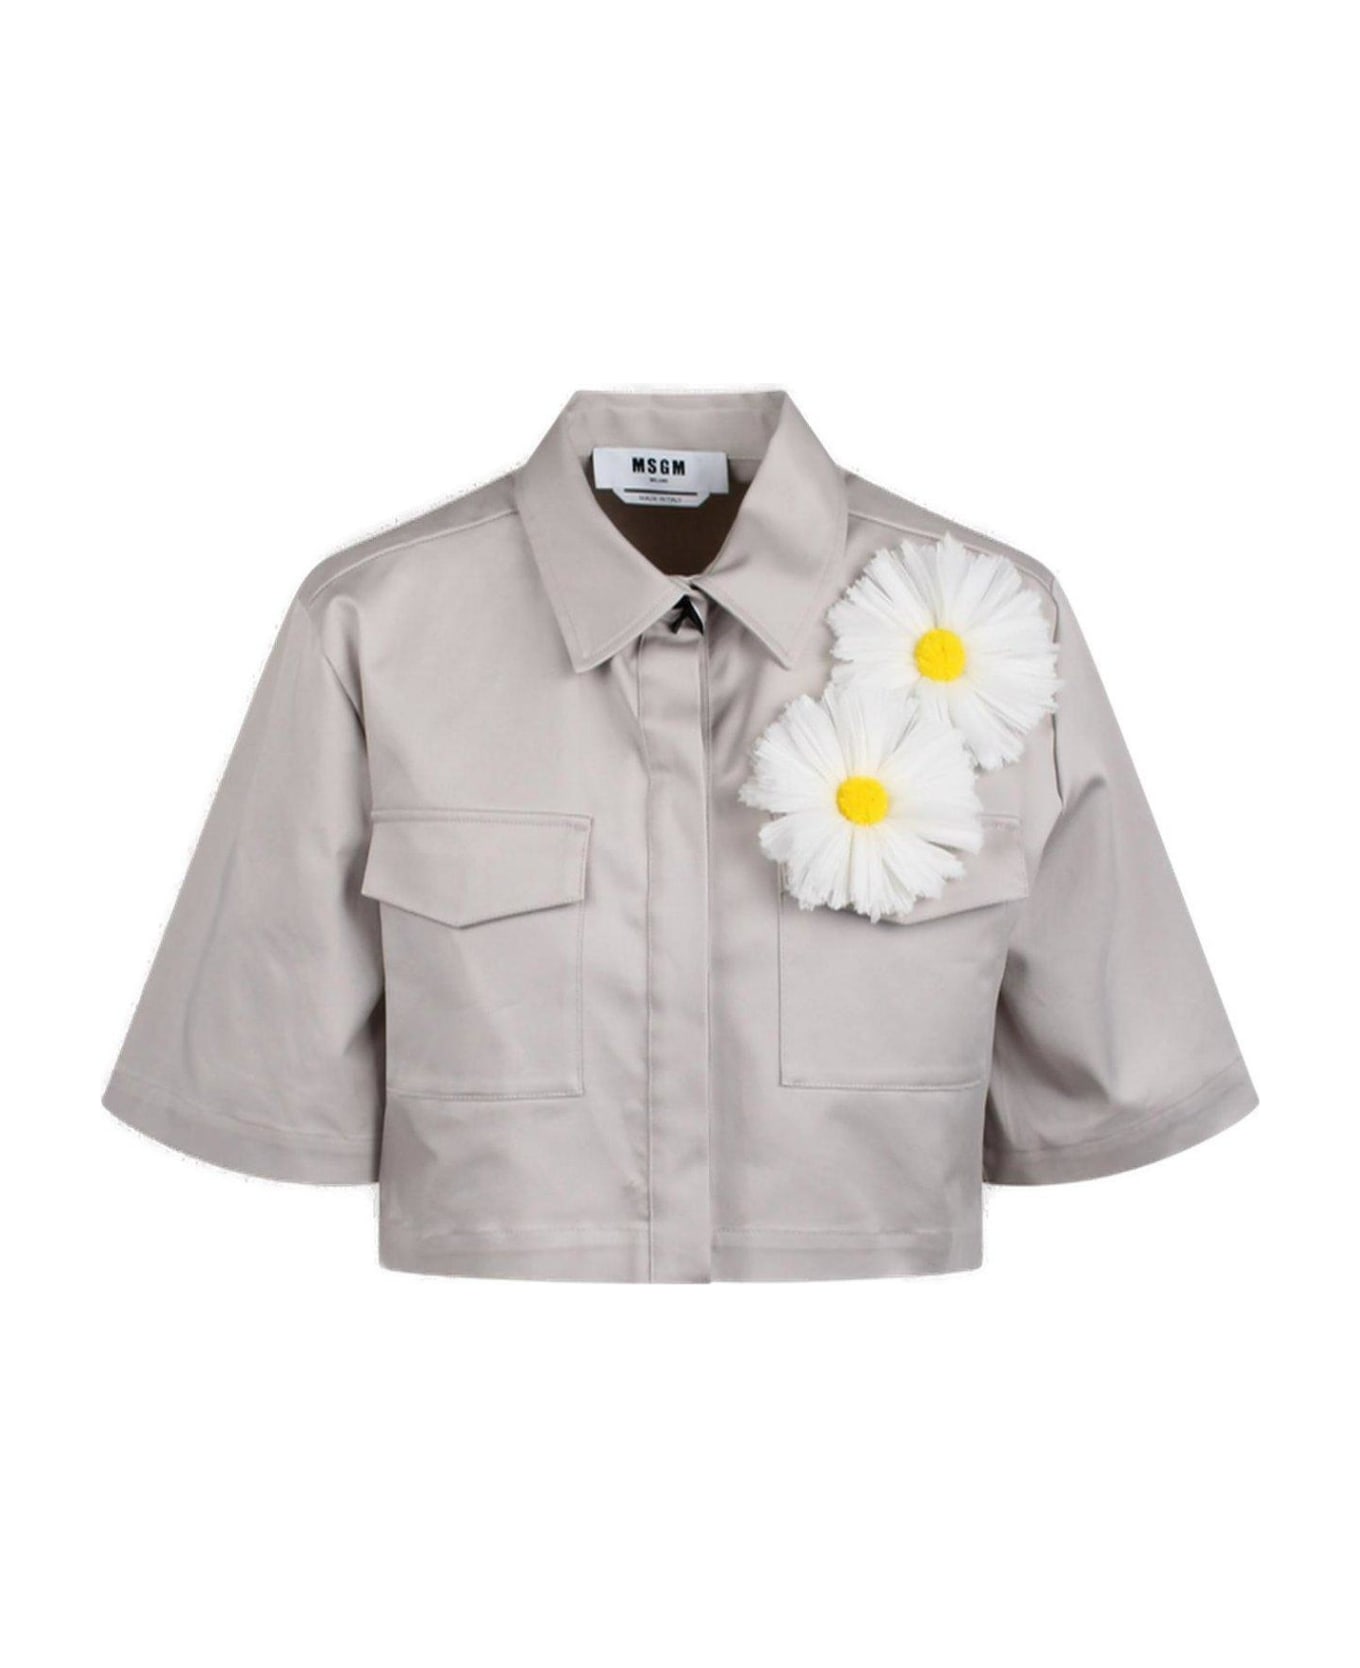 MSGM Floral Detailed Cropped Shirt - Grey シャツ